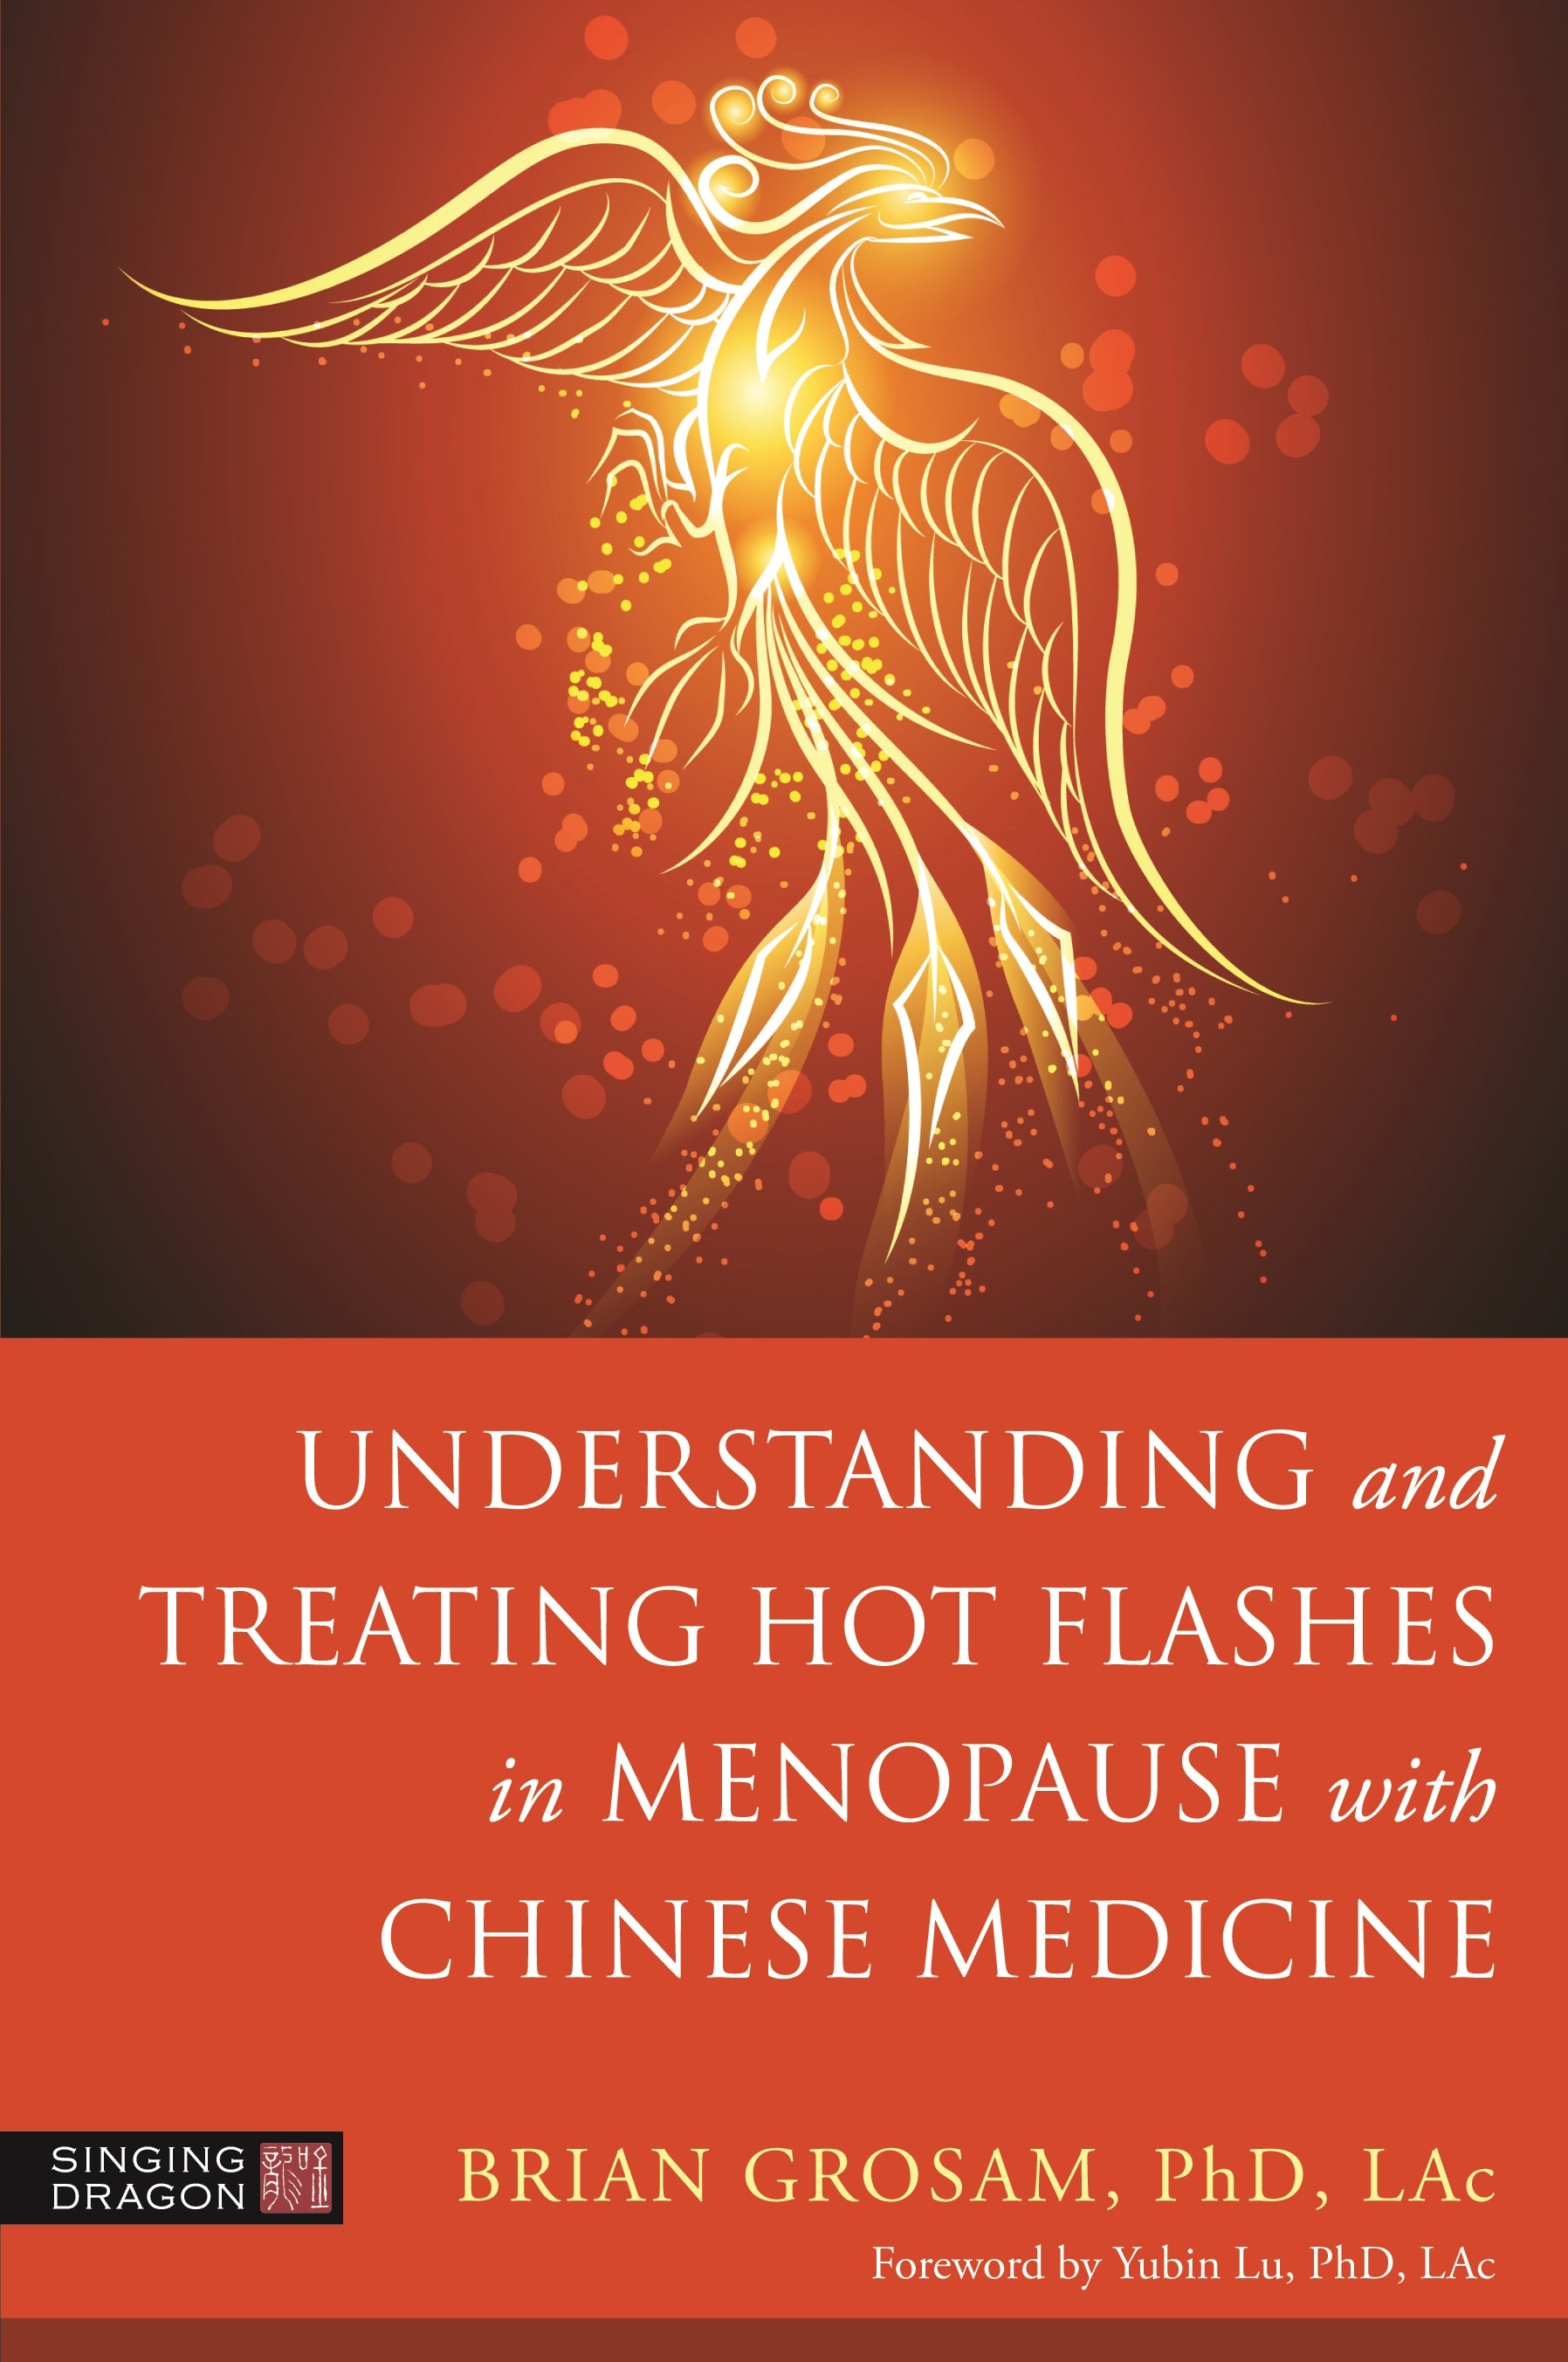 Understanding and Treating Hot Flashes in Menopause with Chinese Medicine by Brian Grosam, Yubin Lu